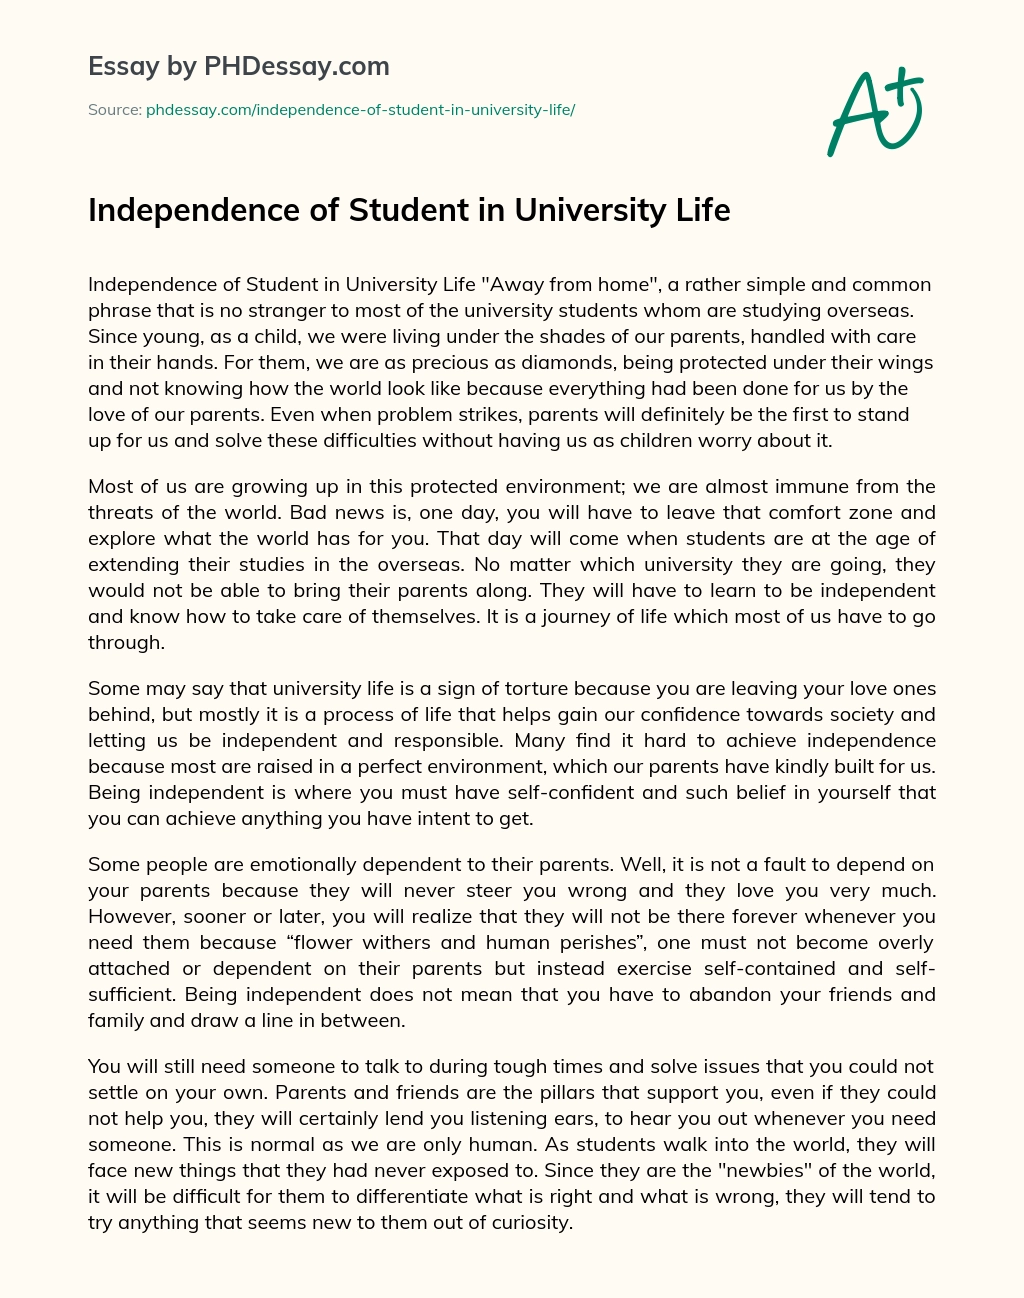 Independence of Student in University Life essay